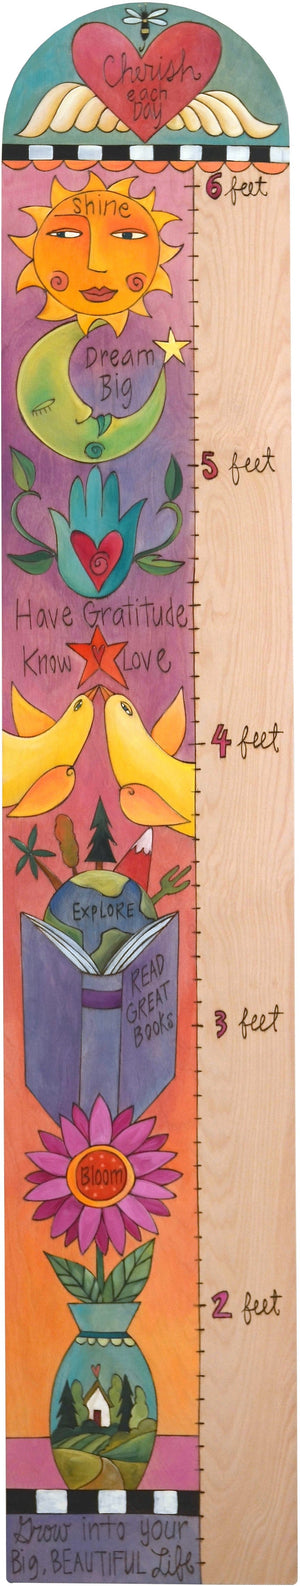 Everlasting Growth Chart –  Colorful growth chart with inspirational messages, topped with a heart with wings